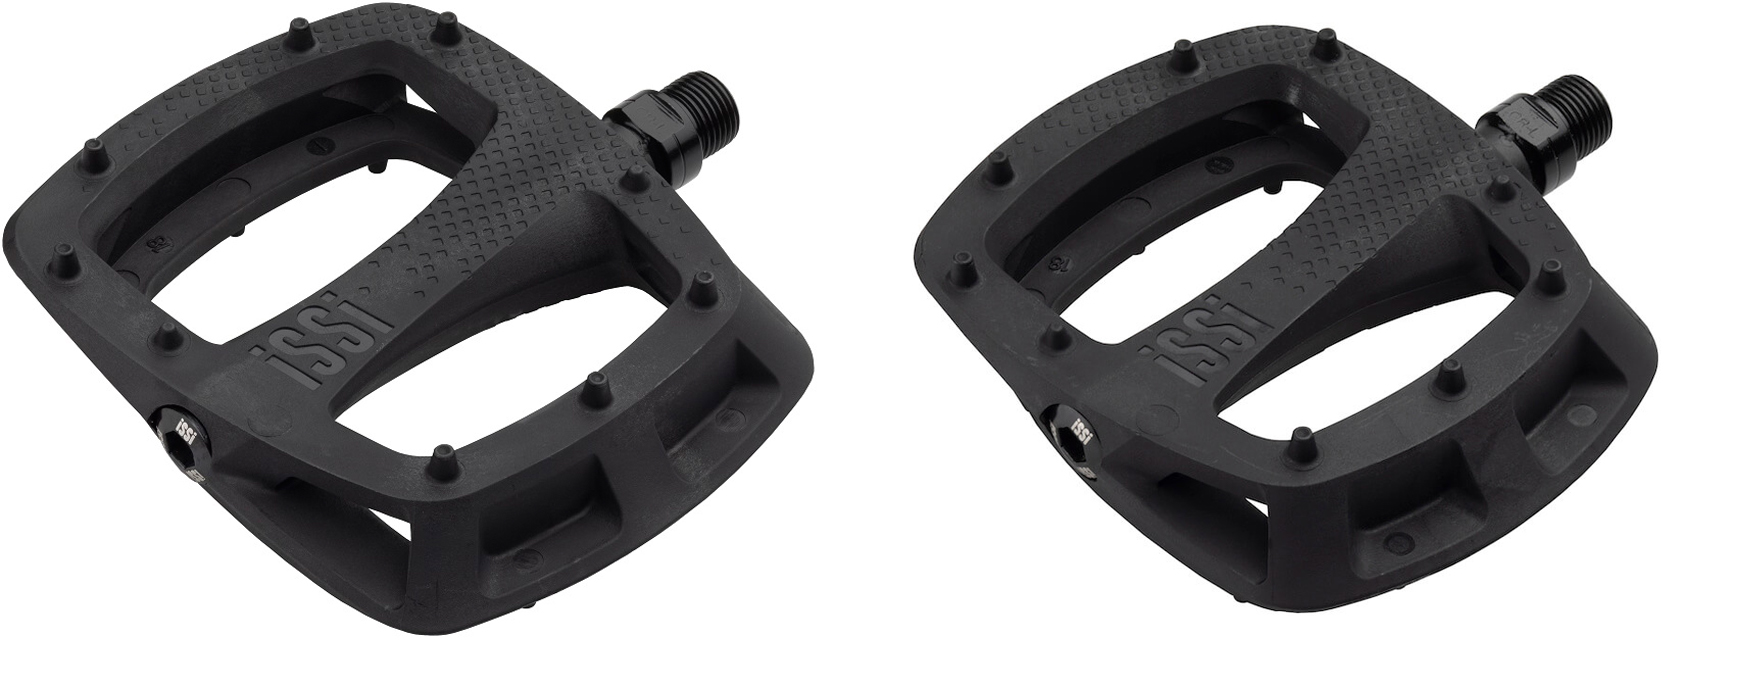 After the Stomp comes the Thump - the new composite flat pedal from iSSi